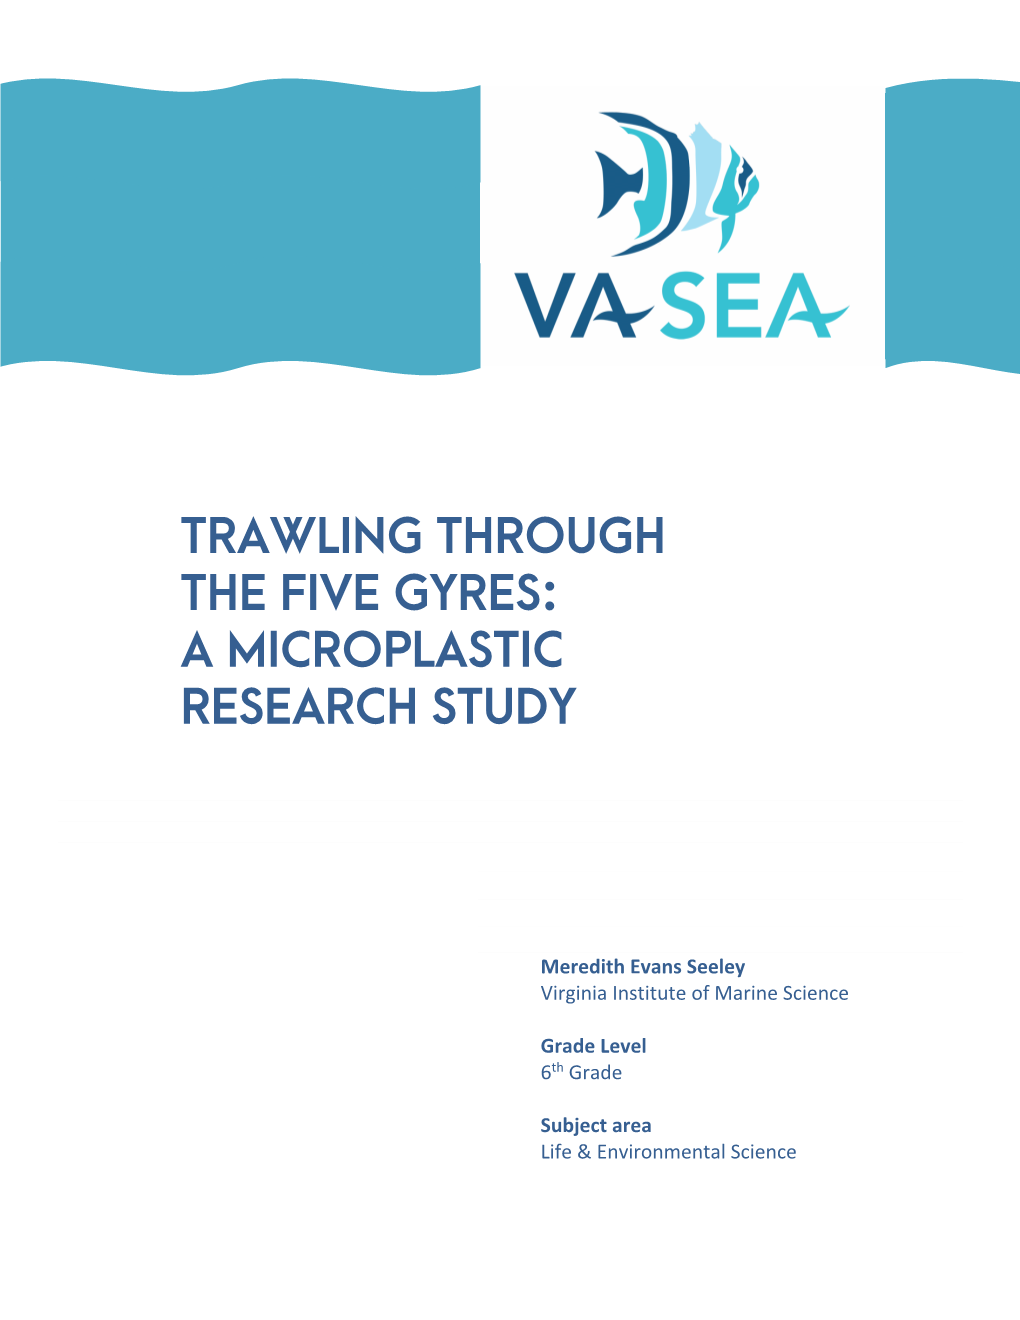 A Microplastic Research Study